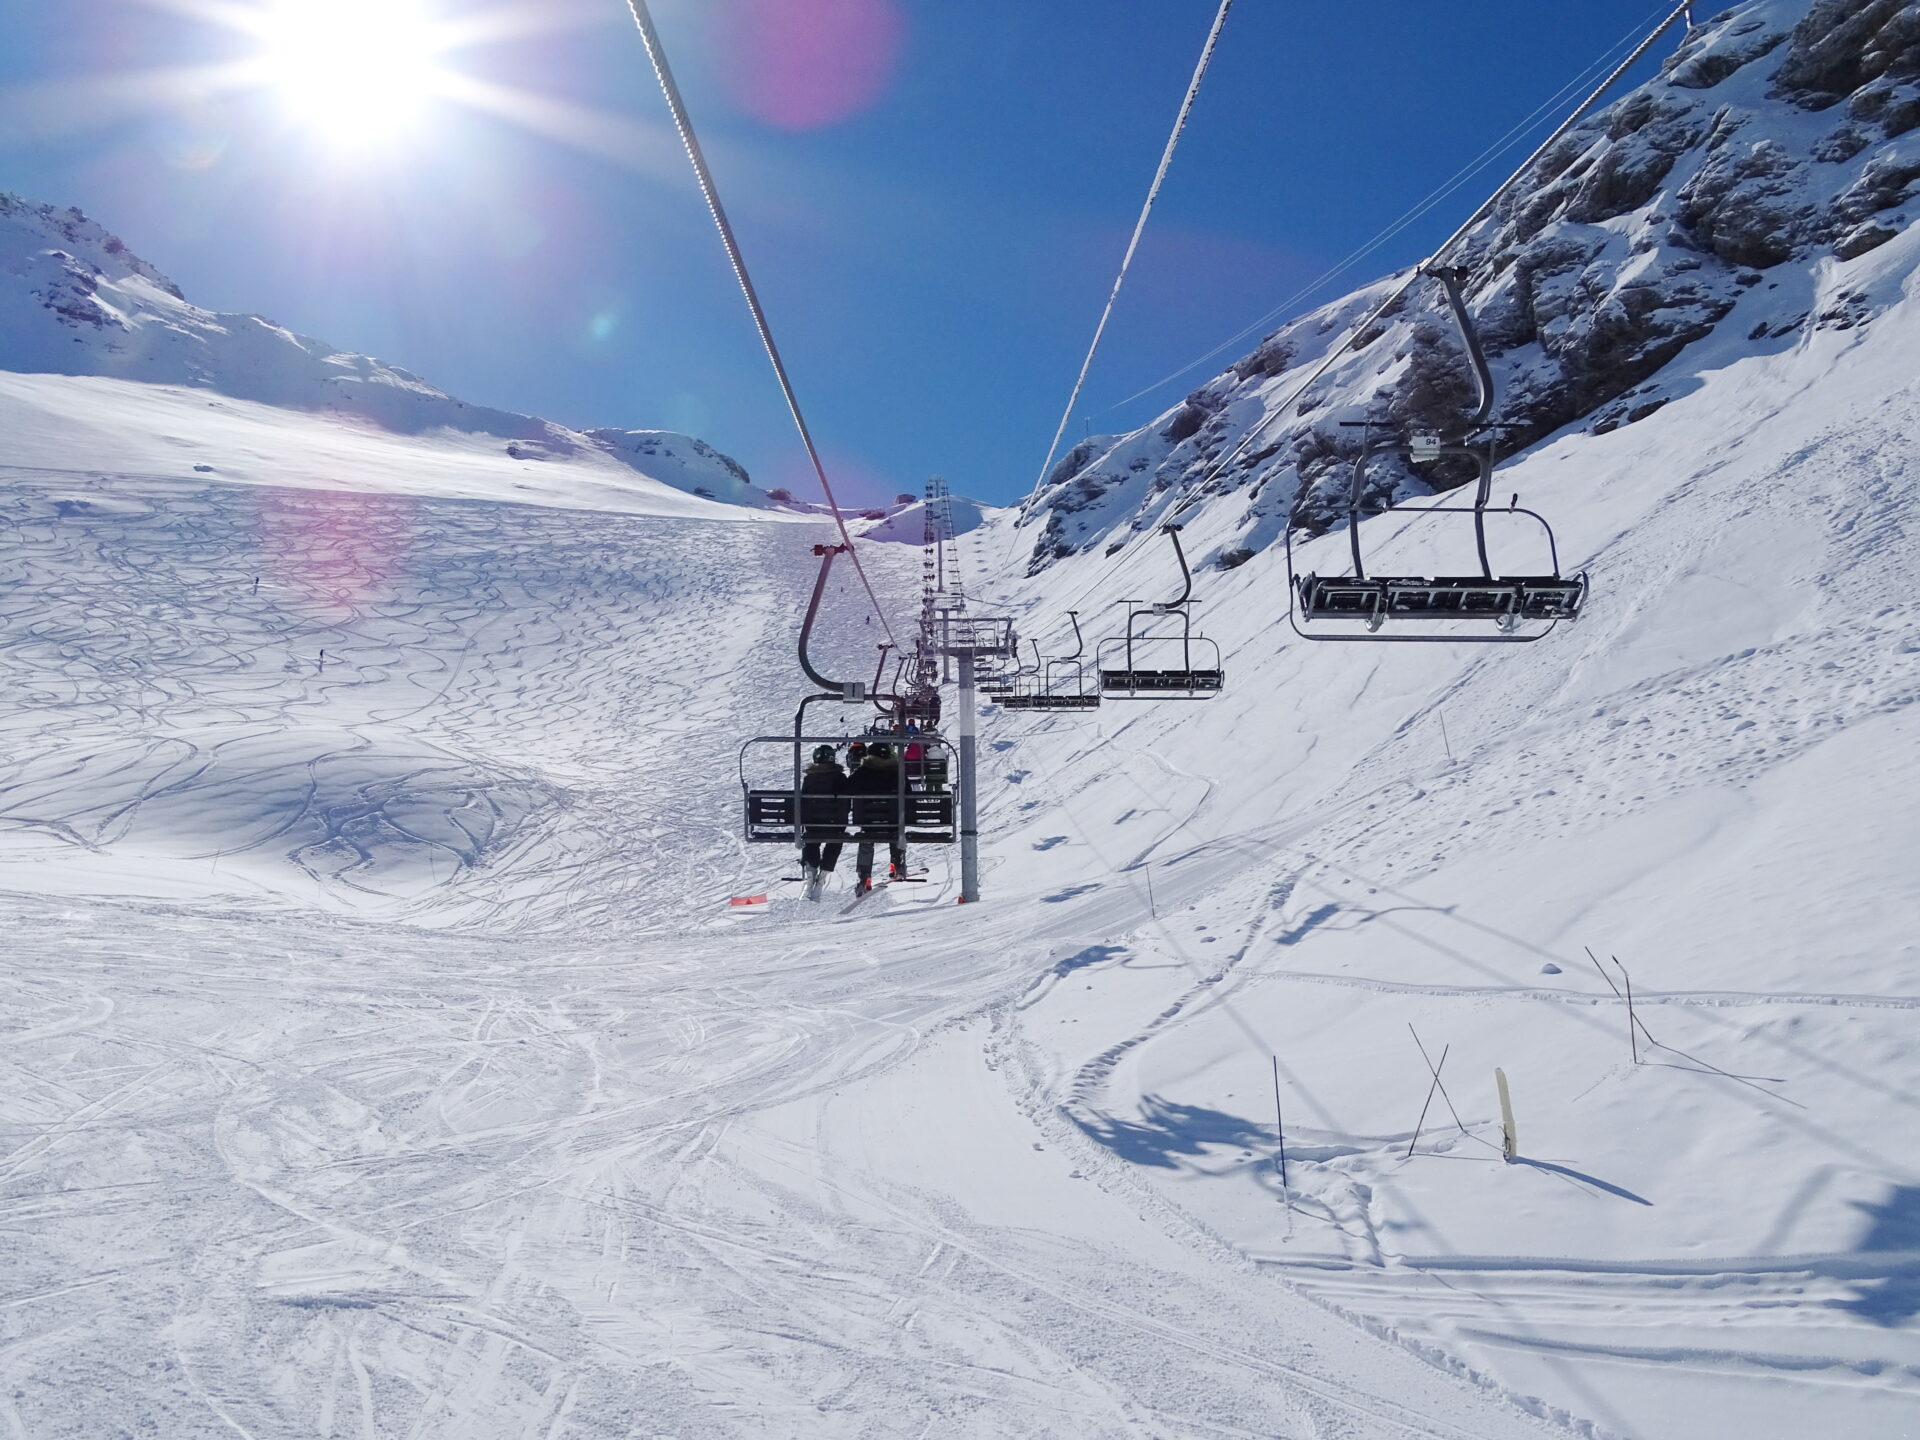 An image of the ski lifts in Val Cenis